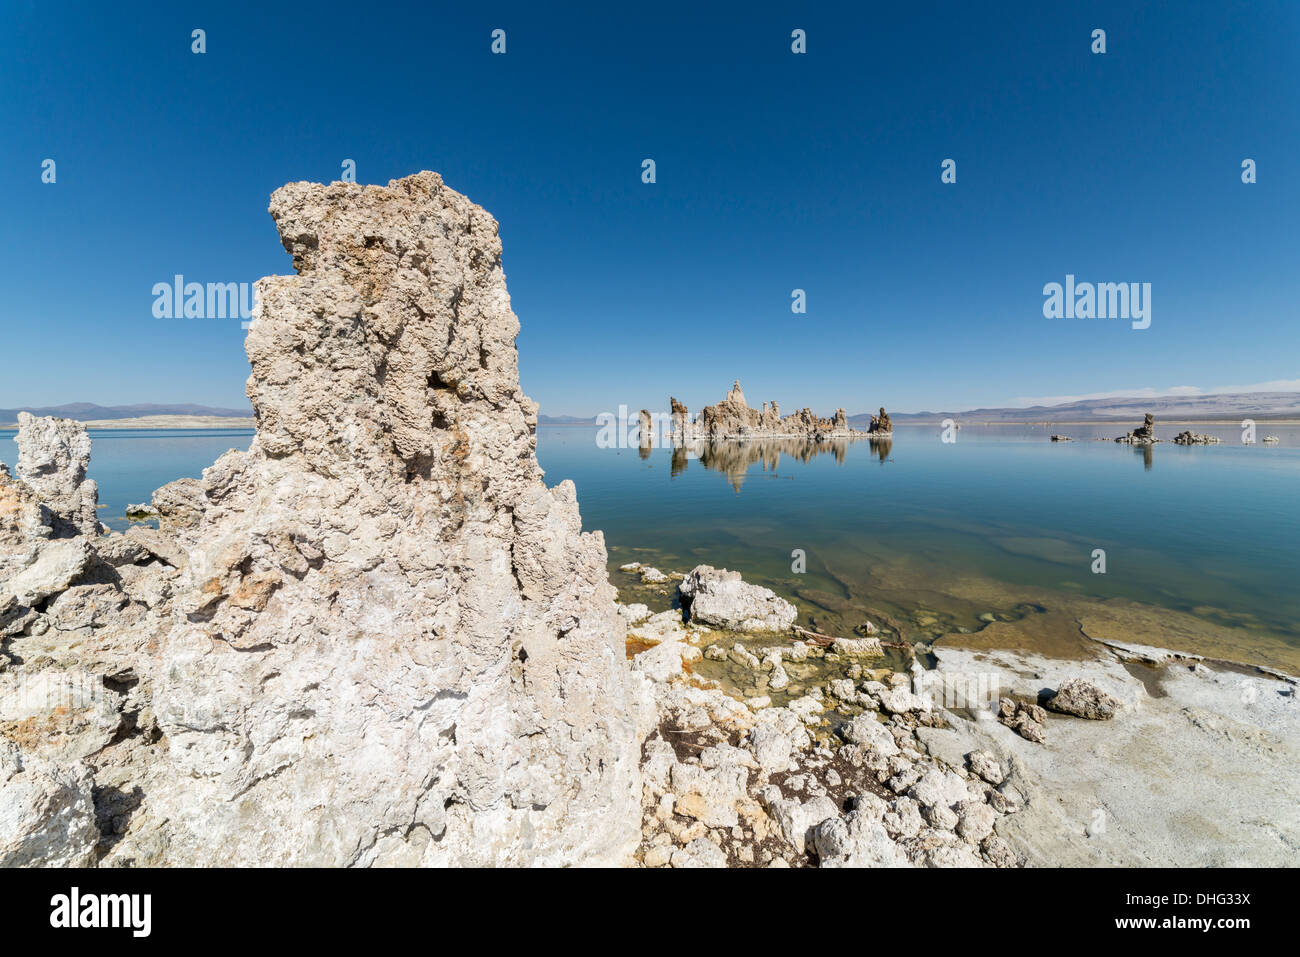 View of tufa at Mono Lake in California, with Sierra Nevada mountains in background. Stock Photo